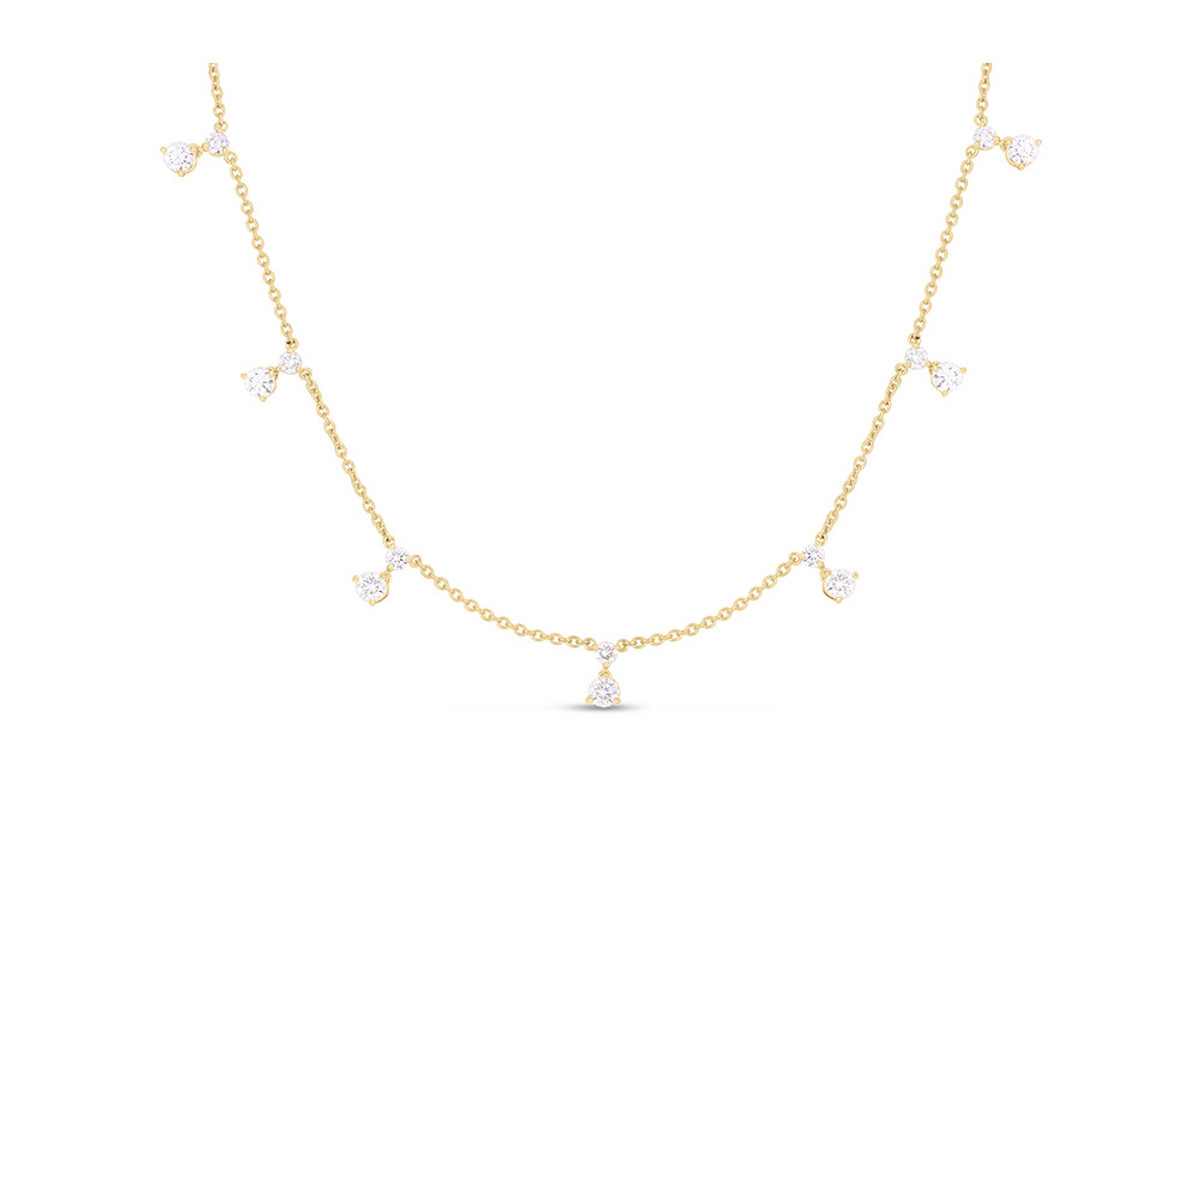 Roberto Coin 18K Yellow Gold Diamond 7 Station Necklace-39803 Product Image